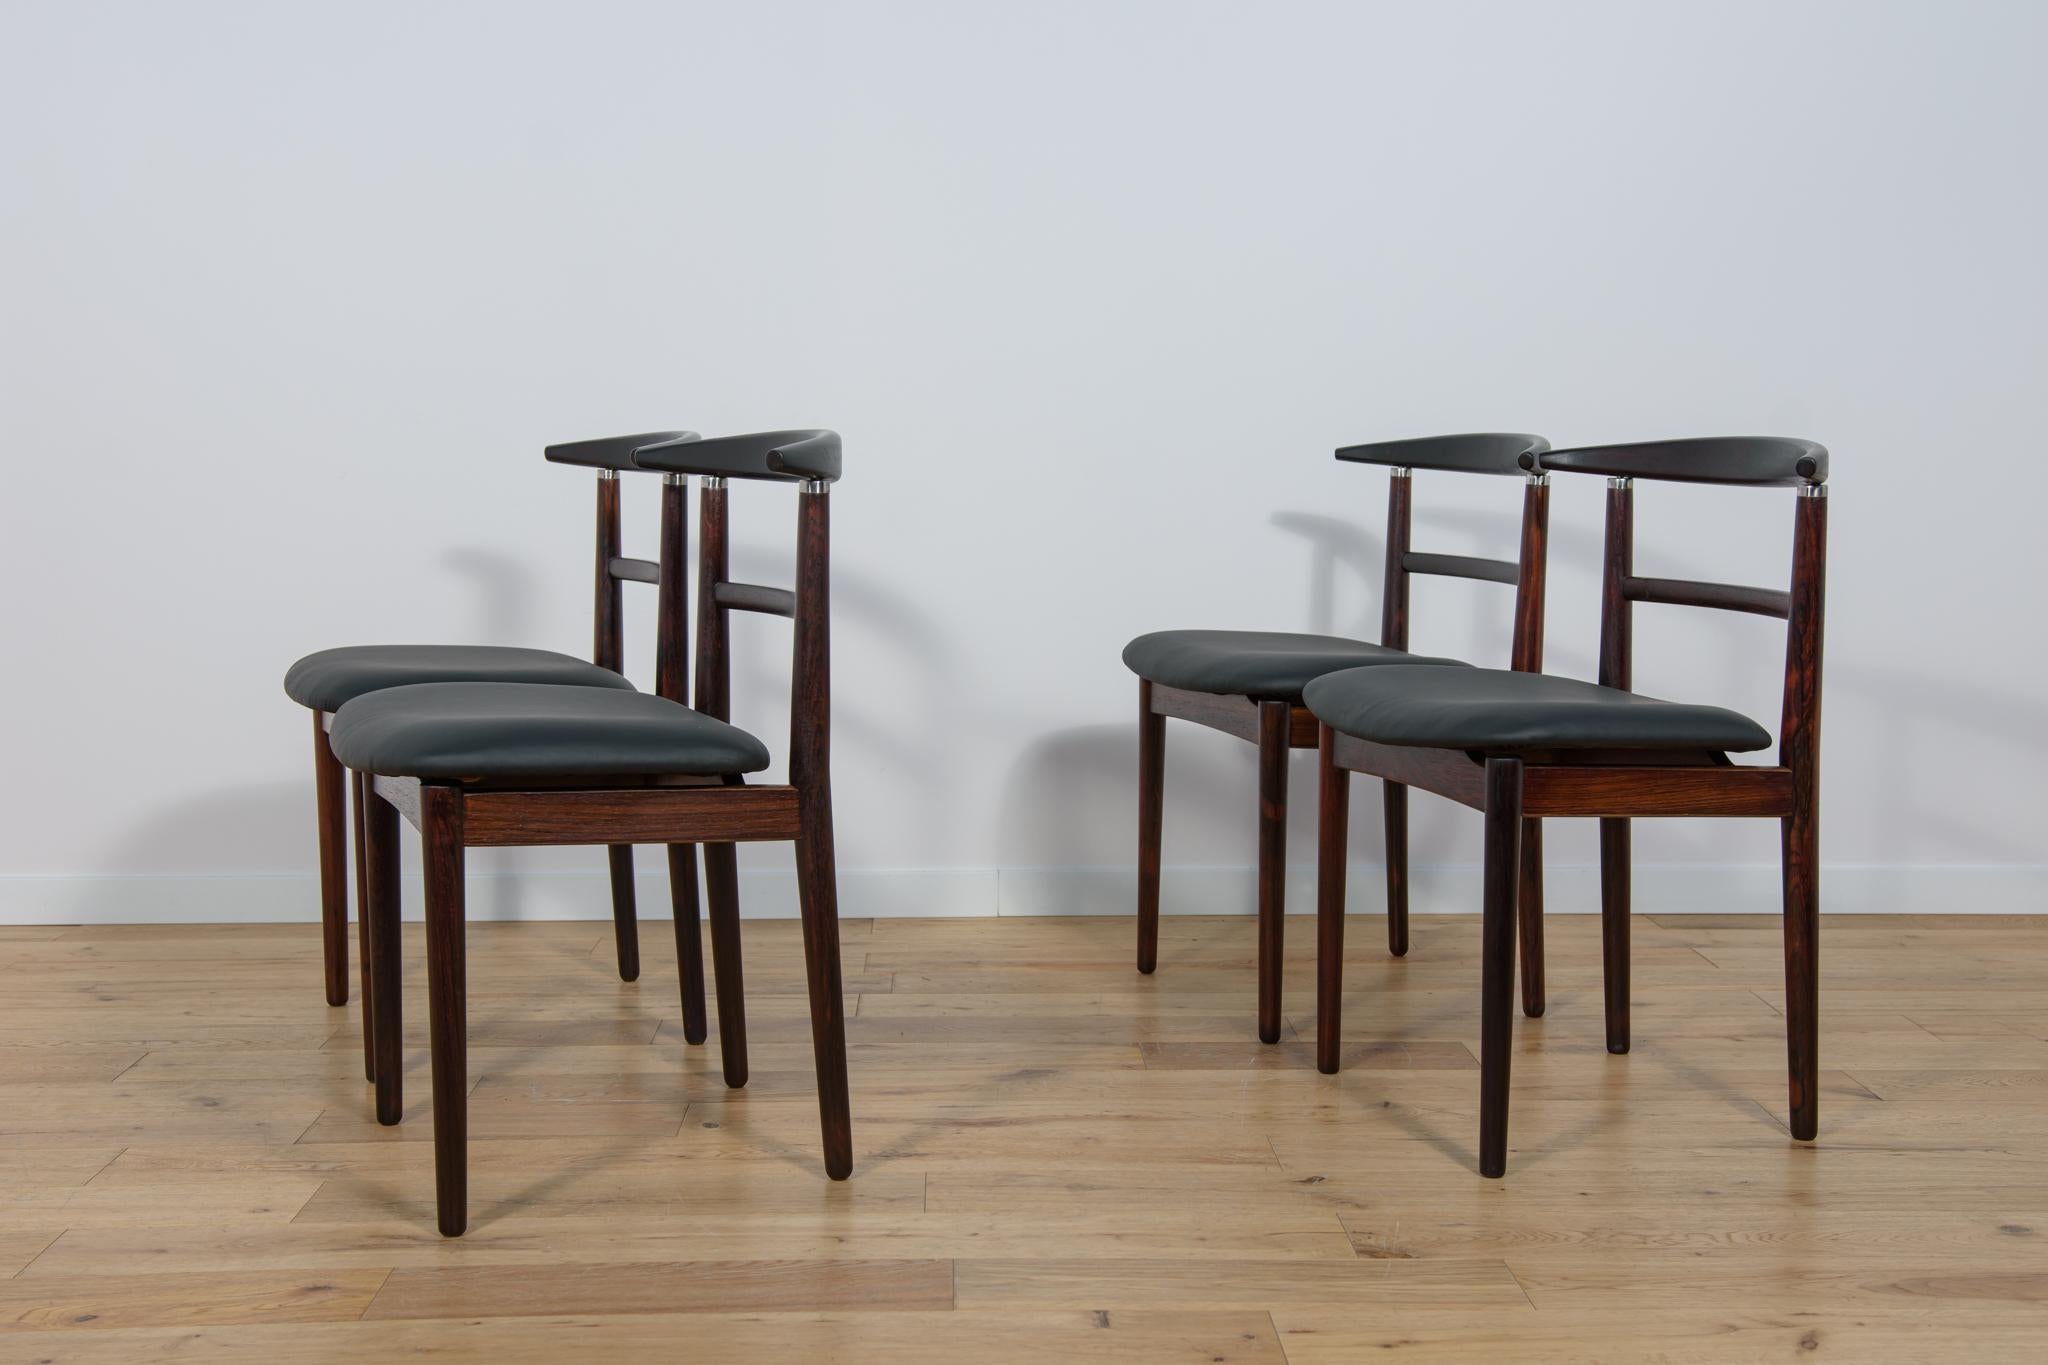 Woodwork Rosewood Dining Chairs by Helge Sibast & Børge Rammerskov, Denmark, 1960s. For Sale